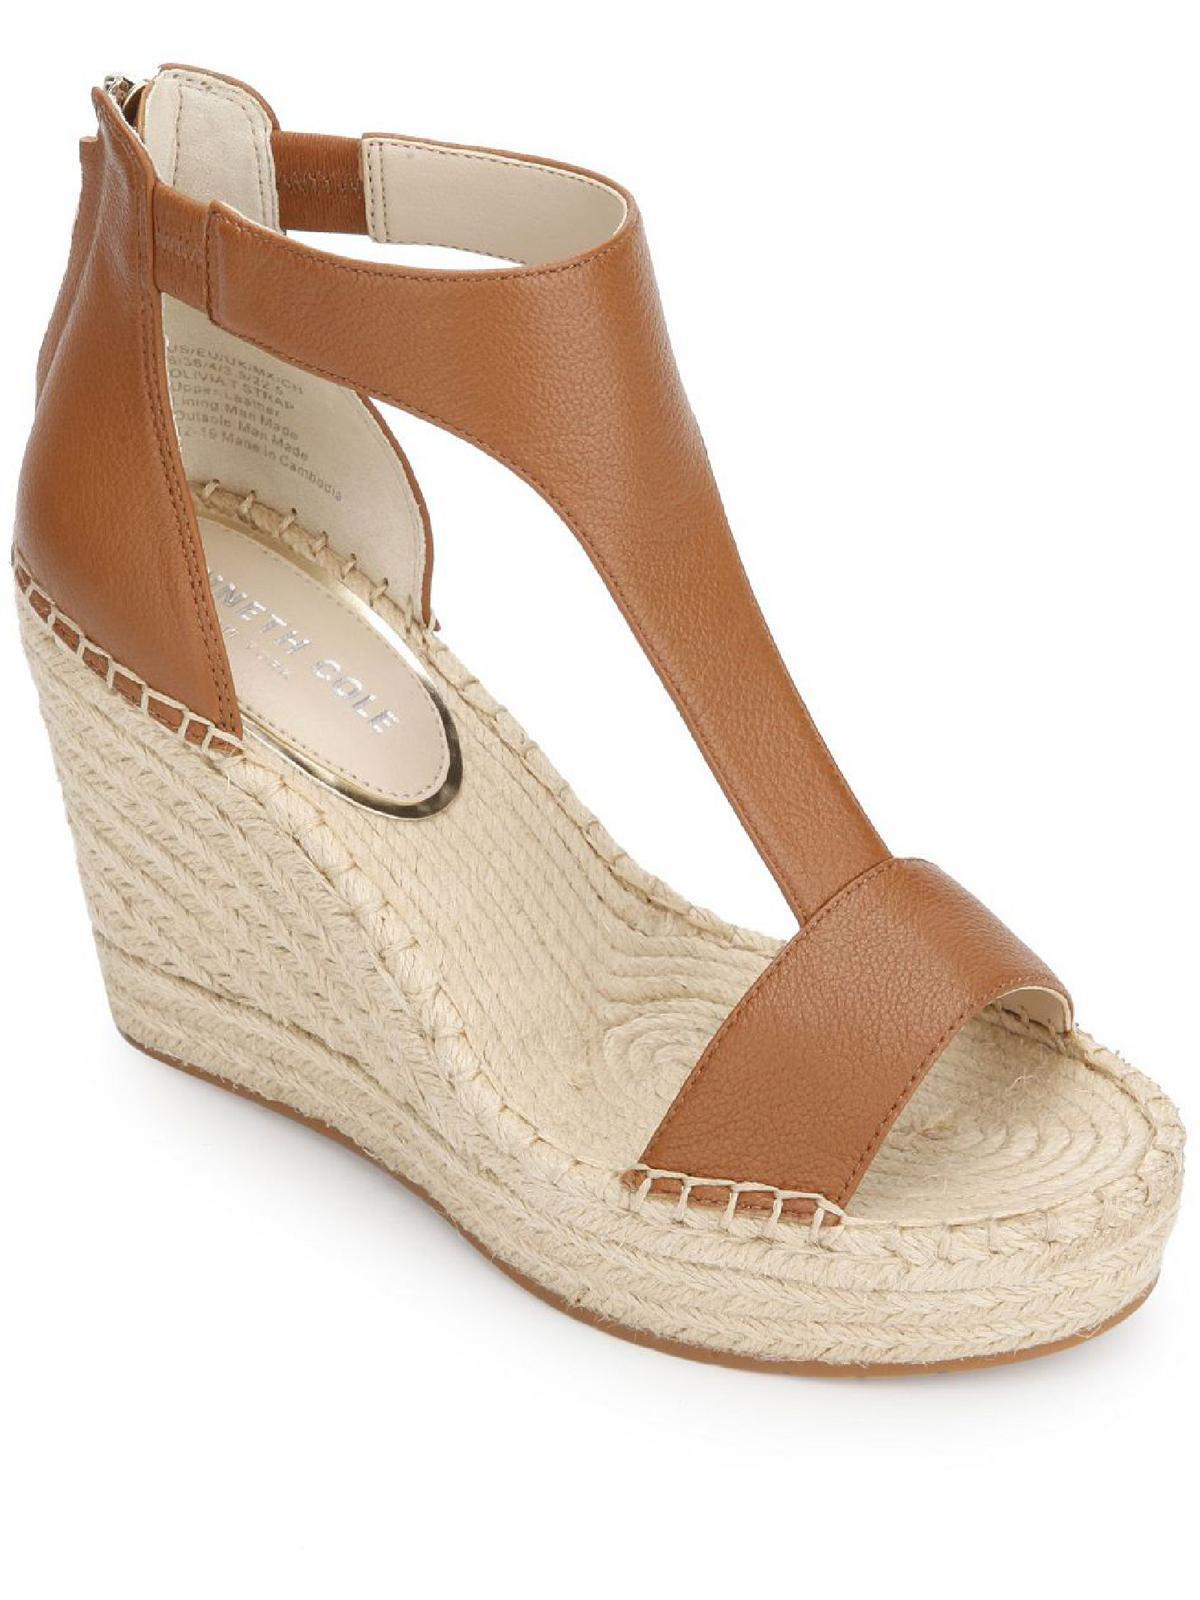 Kenneth Cole Olivia Espadrille Wedge Sandals in Natural | Lyst